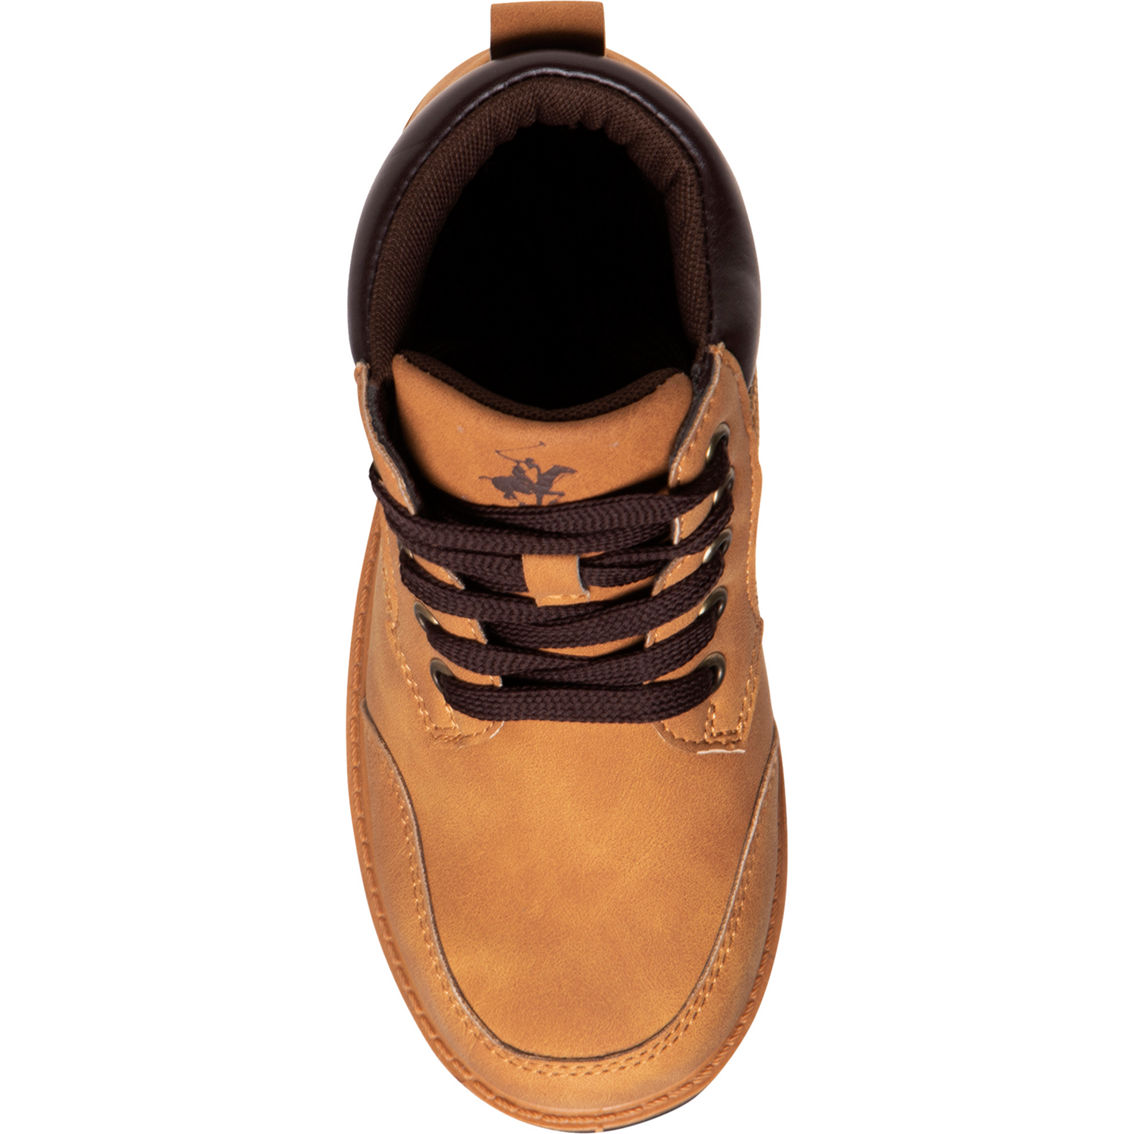 Beverly Hills Polo Club Preschool Boys Casual Hiker Boots - Image 3 of 5